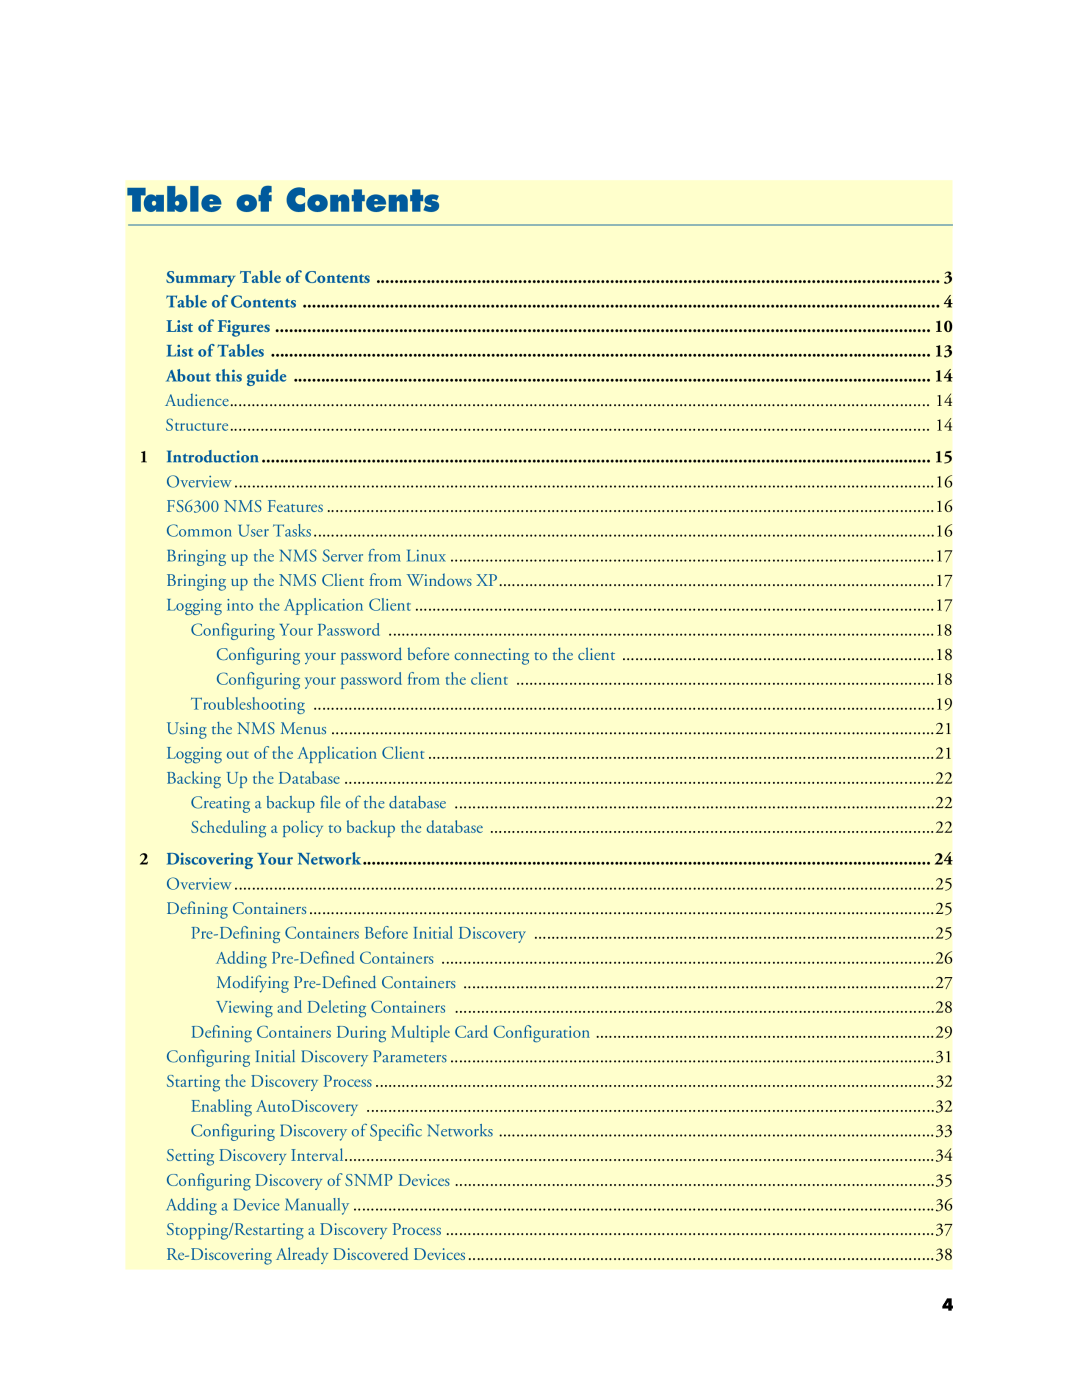 Patton electronic 6300 Summary Table of Contents, List of Figures, List of Tables, About this guide, Introduction 